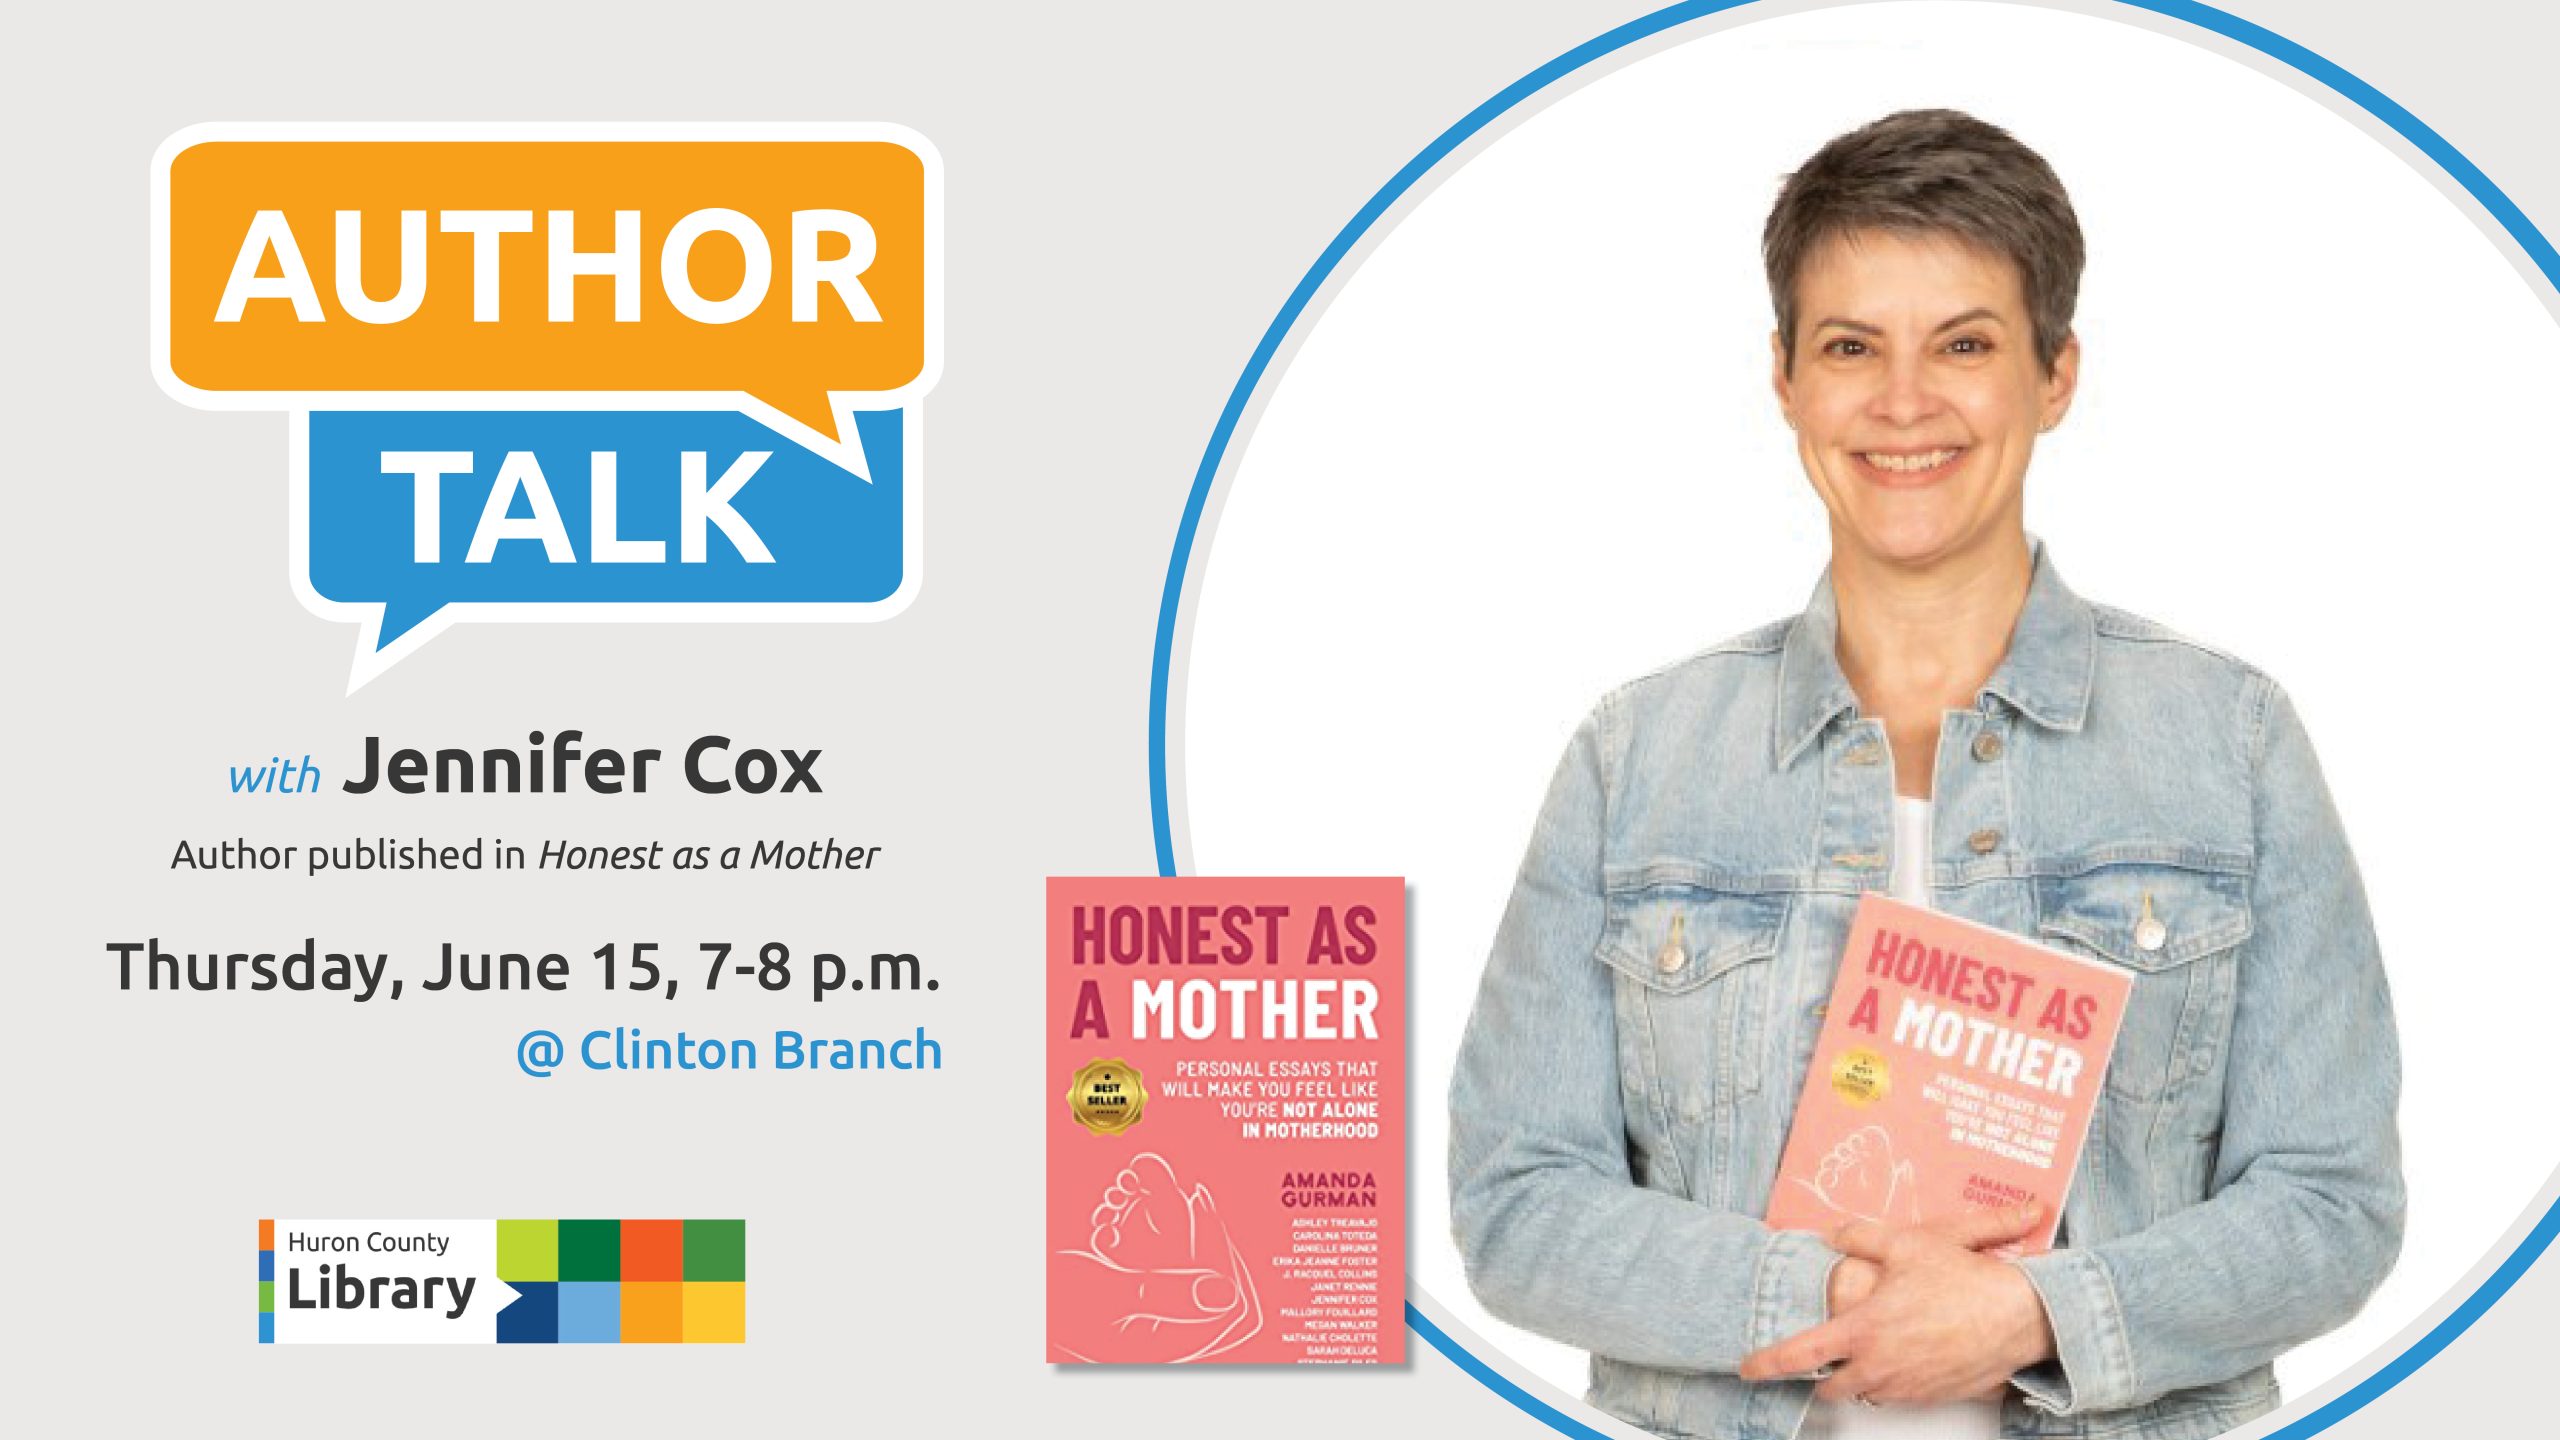 Photo of author Jennifer Cox with the cover image of the book Honest as a Mother.